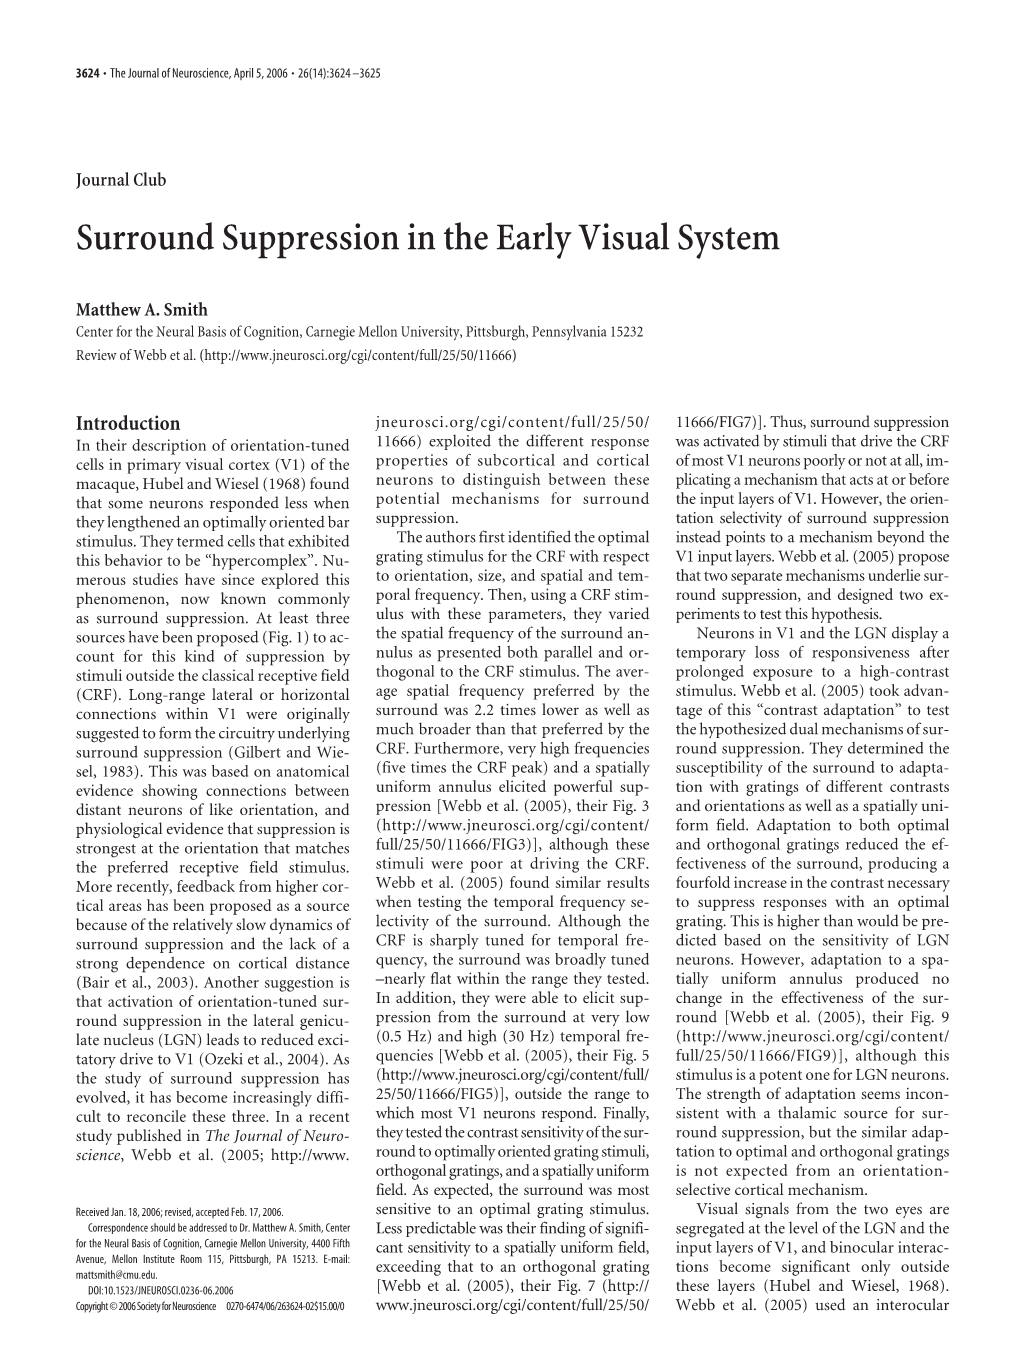 Surround Suppression in the Early Visual System